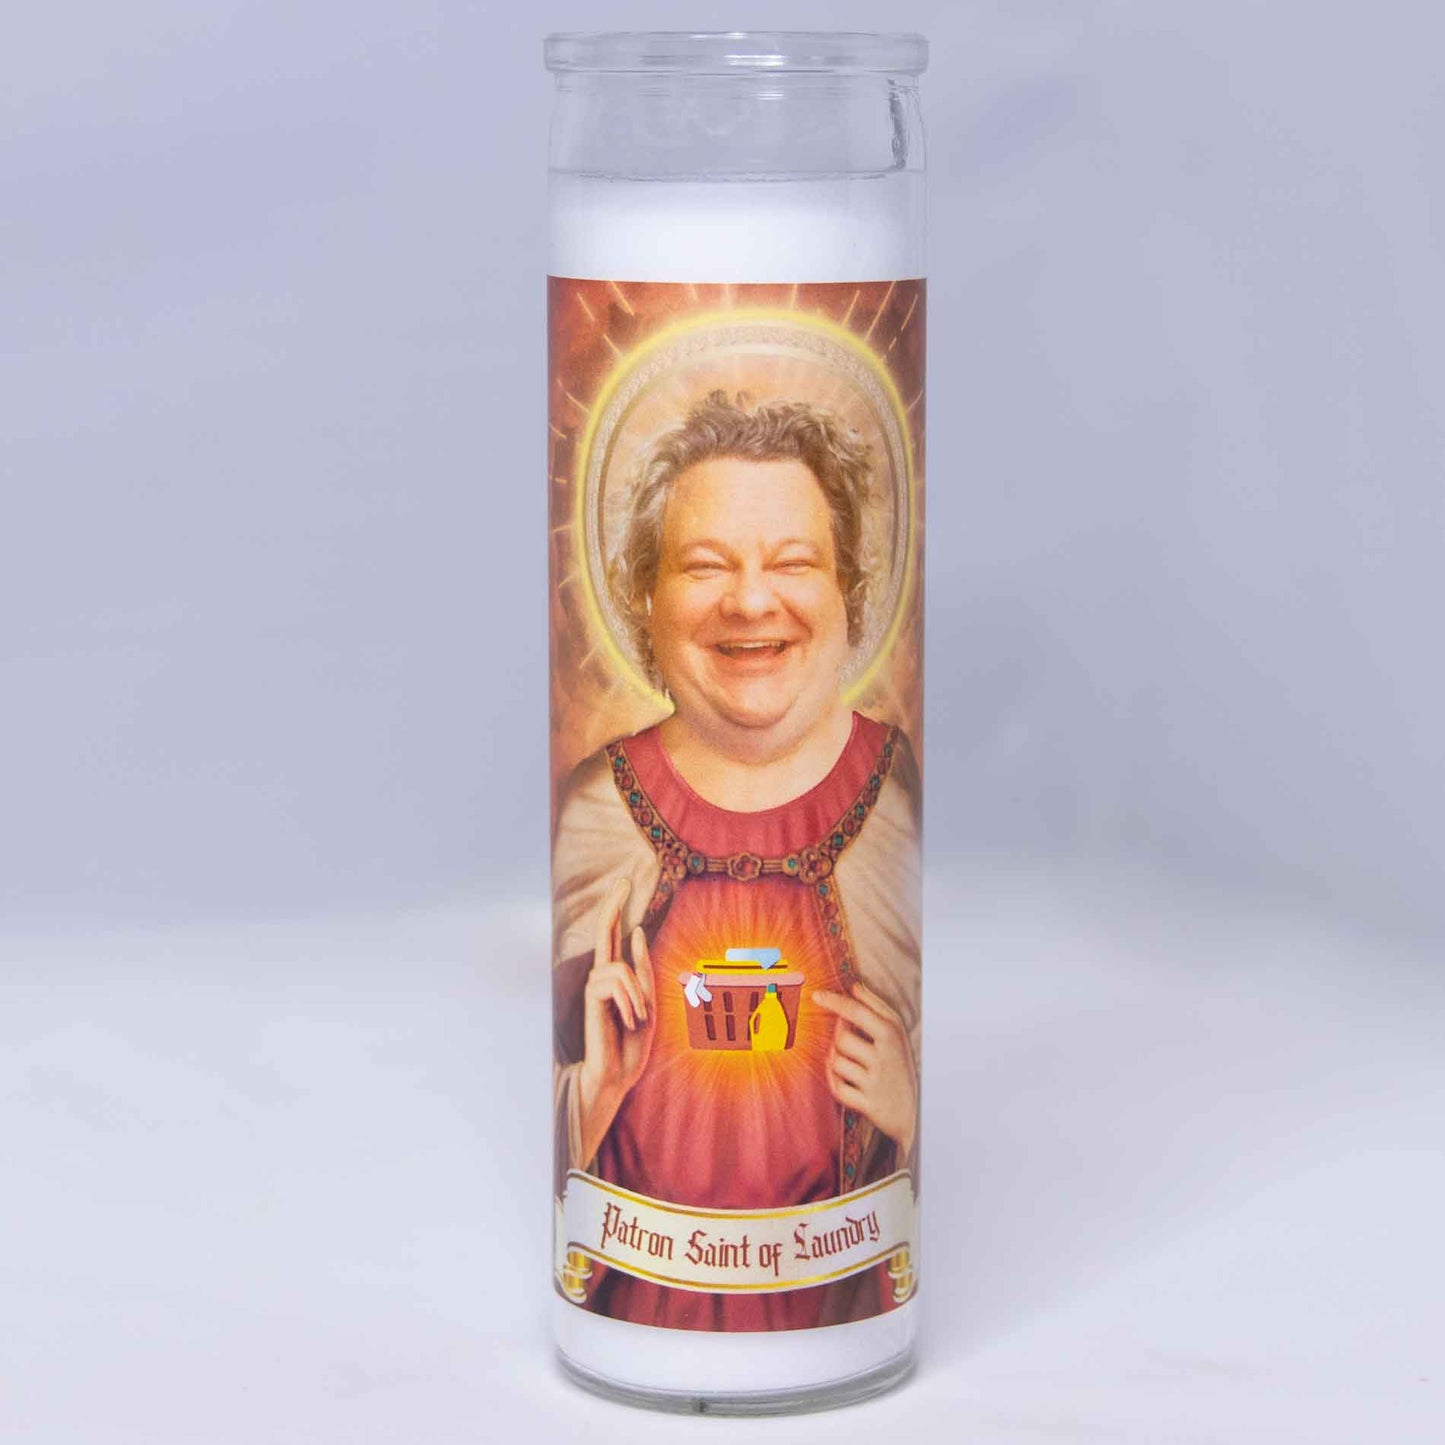 The laundry evangelist / the laundry guy's candle Patron Saint of Laundry